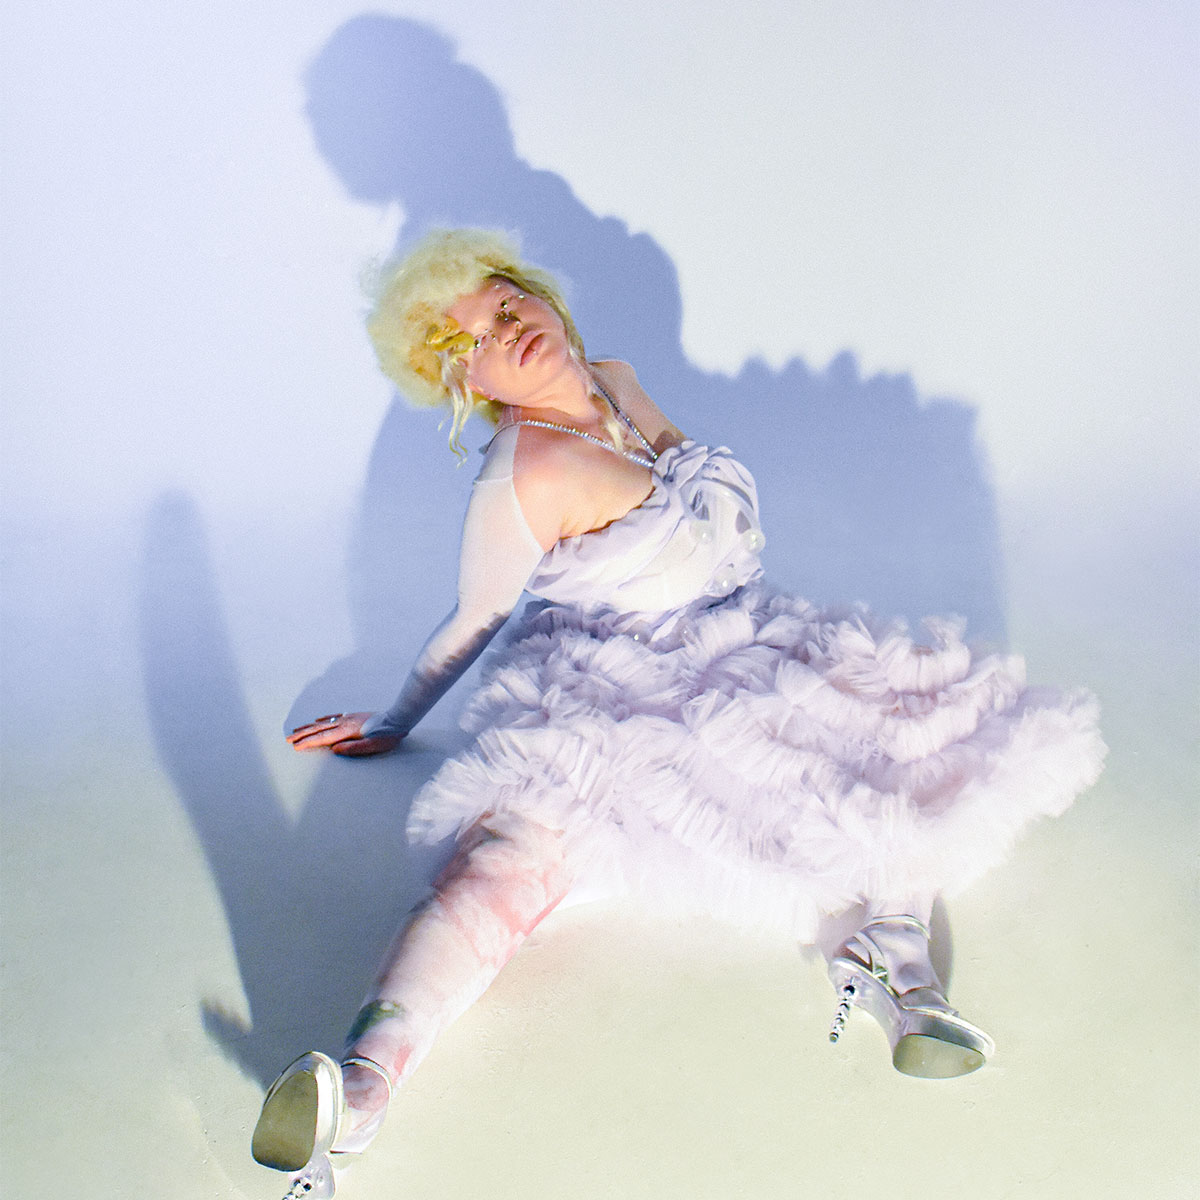 Model showcasing a poofy dress. The model is sitting on gthe ground leaning backwards with their legs apart. The dress is off-white, wearing multicoloured tights and white high-heeled shoes over a white photo backdrop.